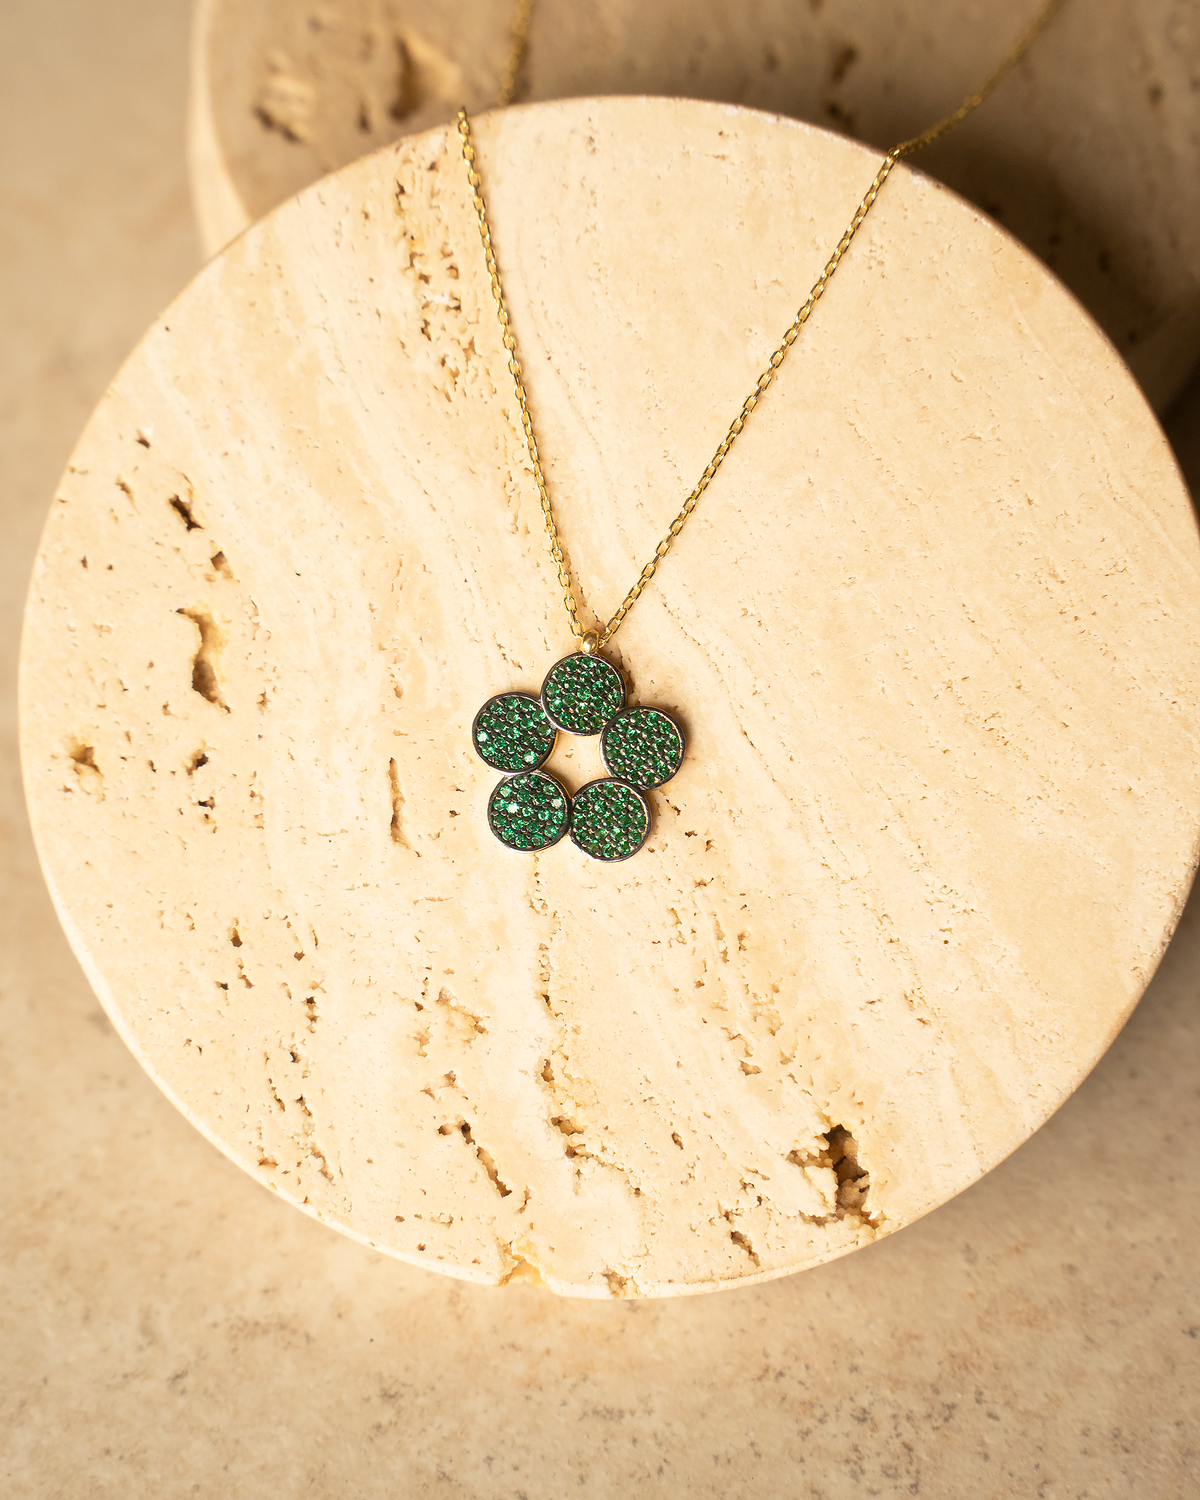 NARIN Floral Necklace